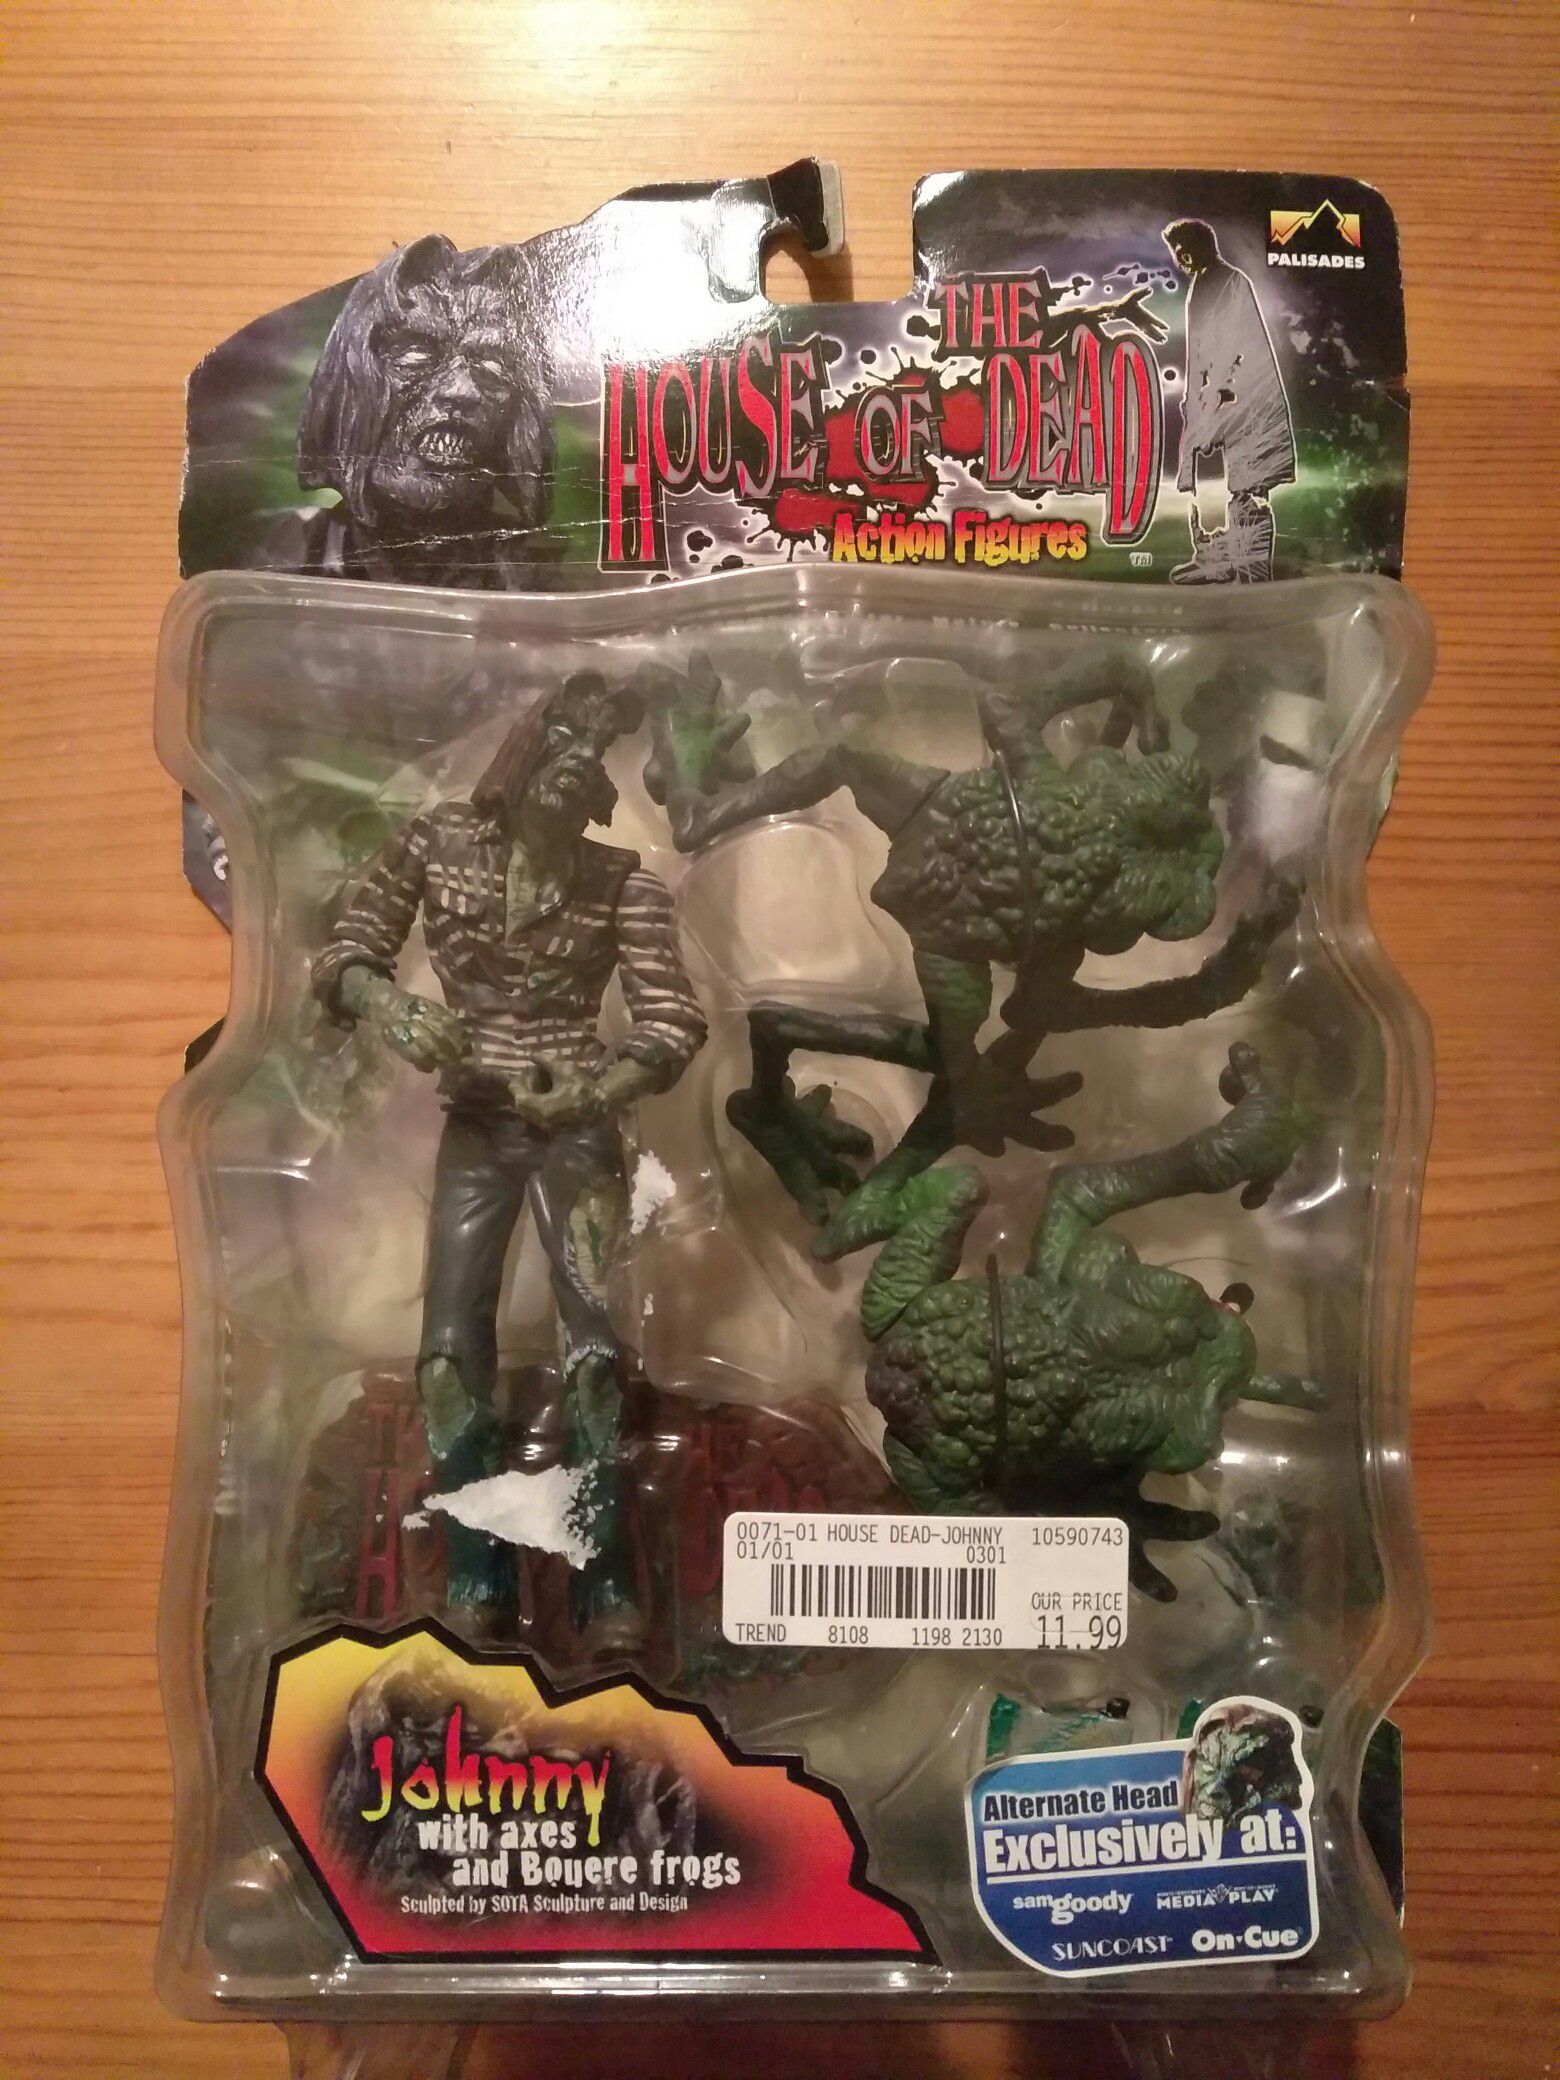 Johnny The House of the Dead action figure